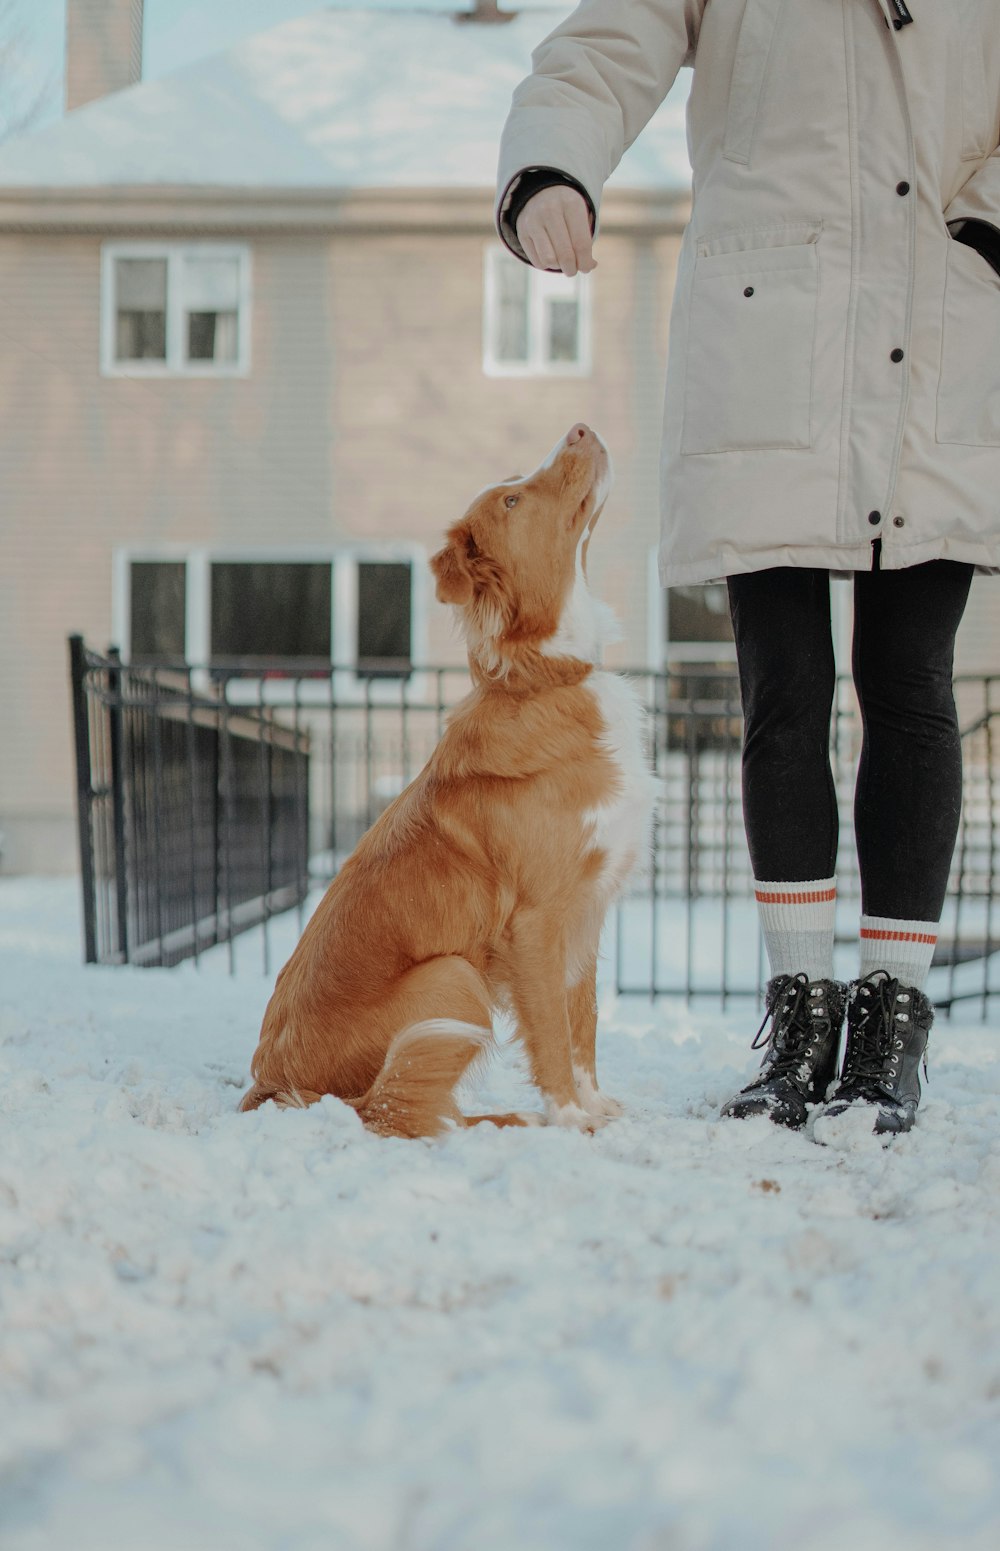 person in gray jacket and black pants standing beside brown dog on snow covered ground during